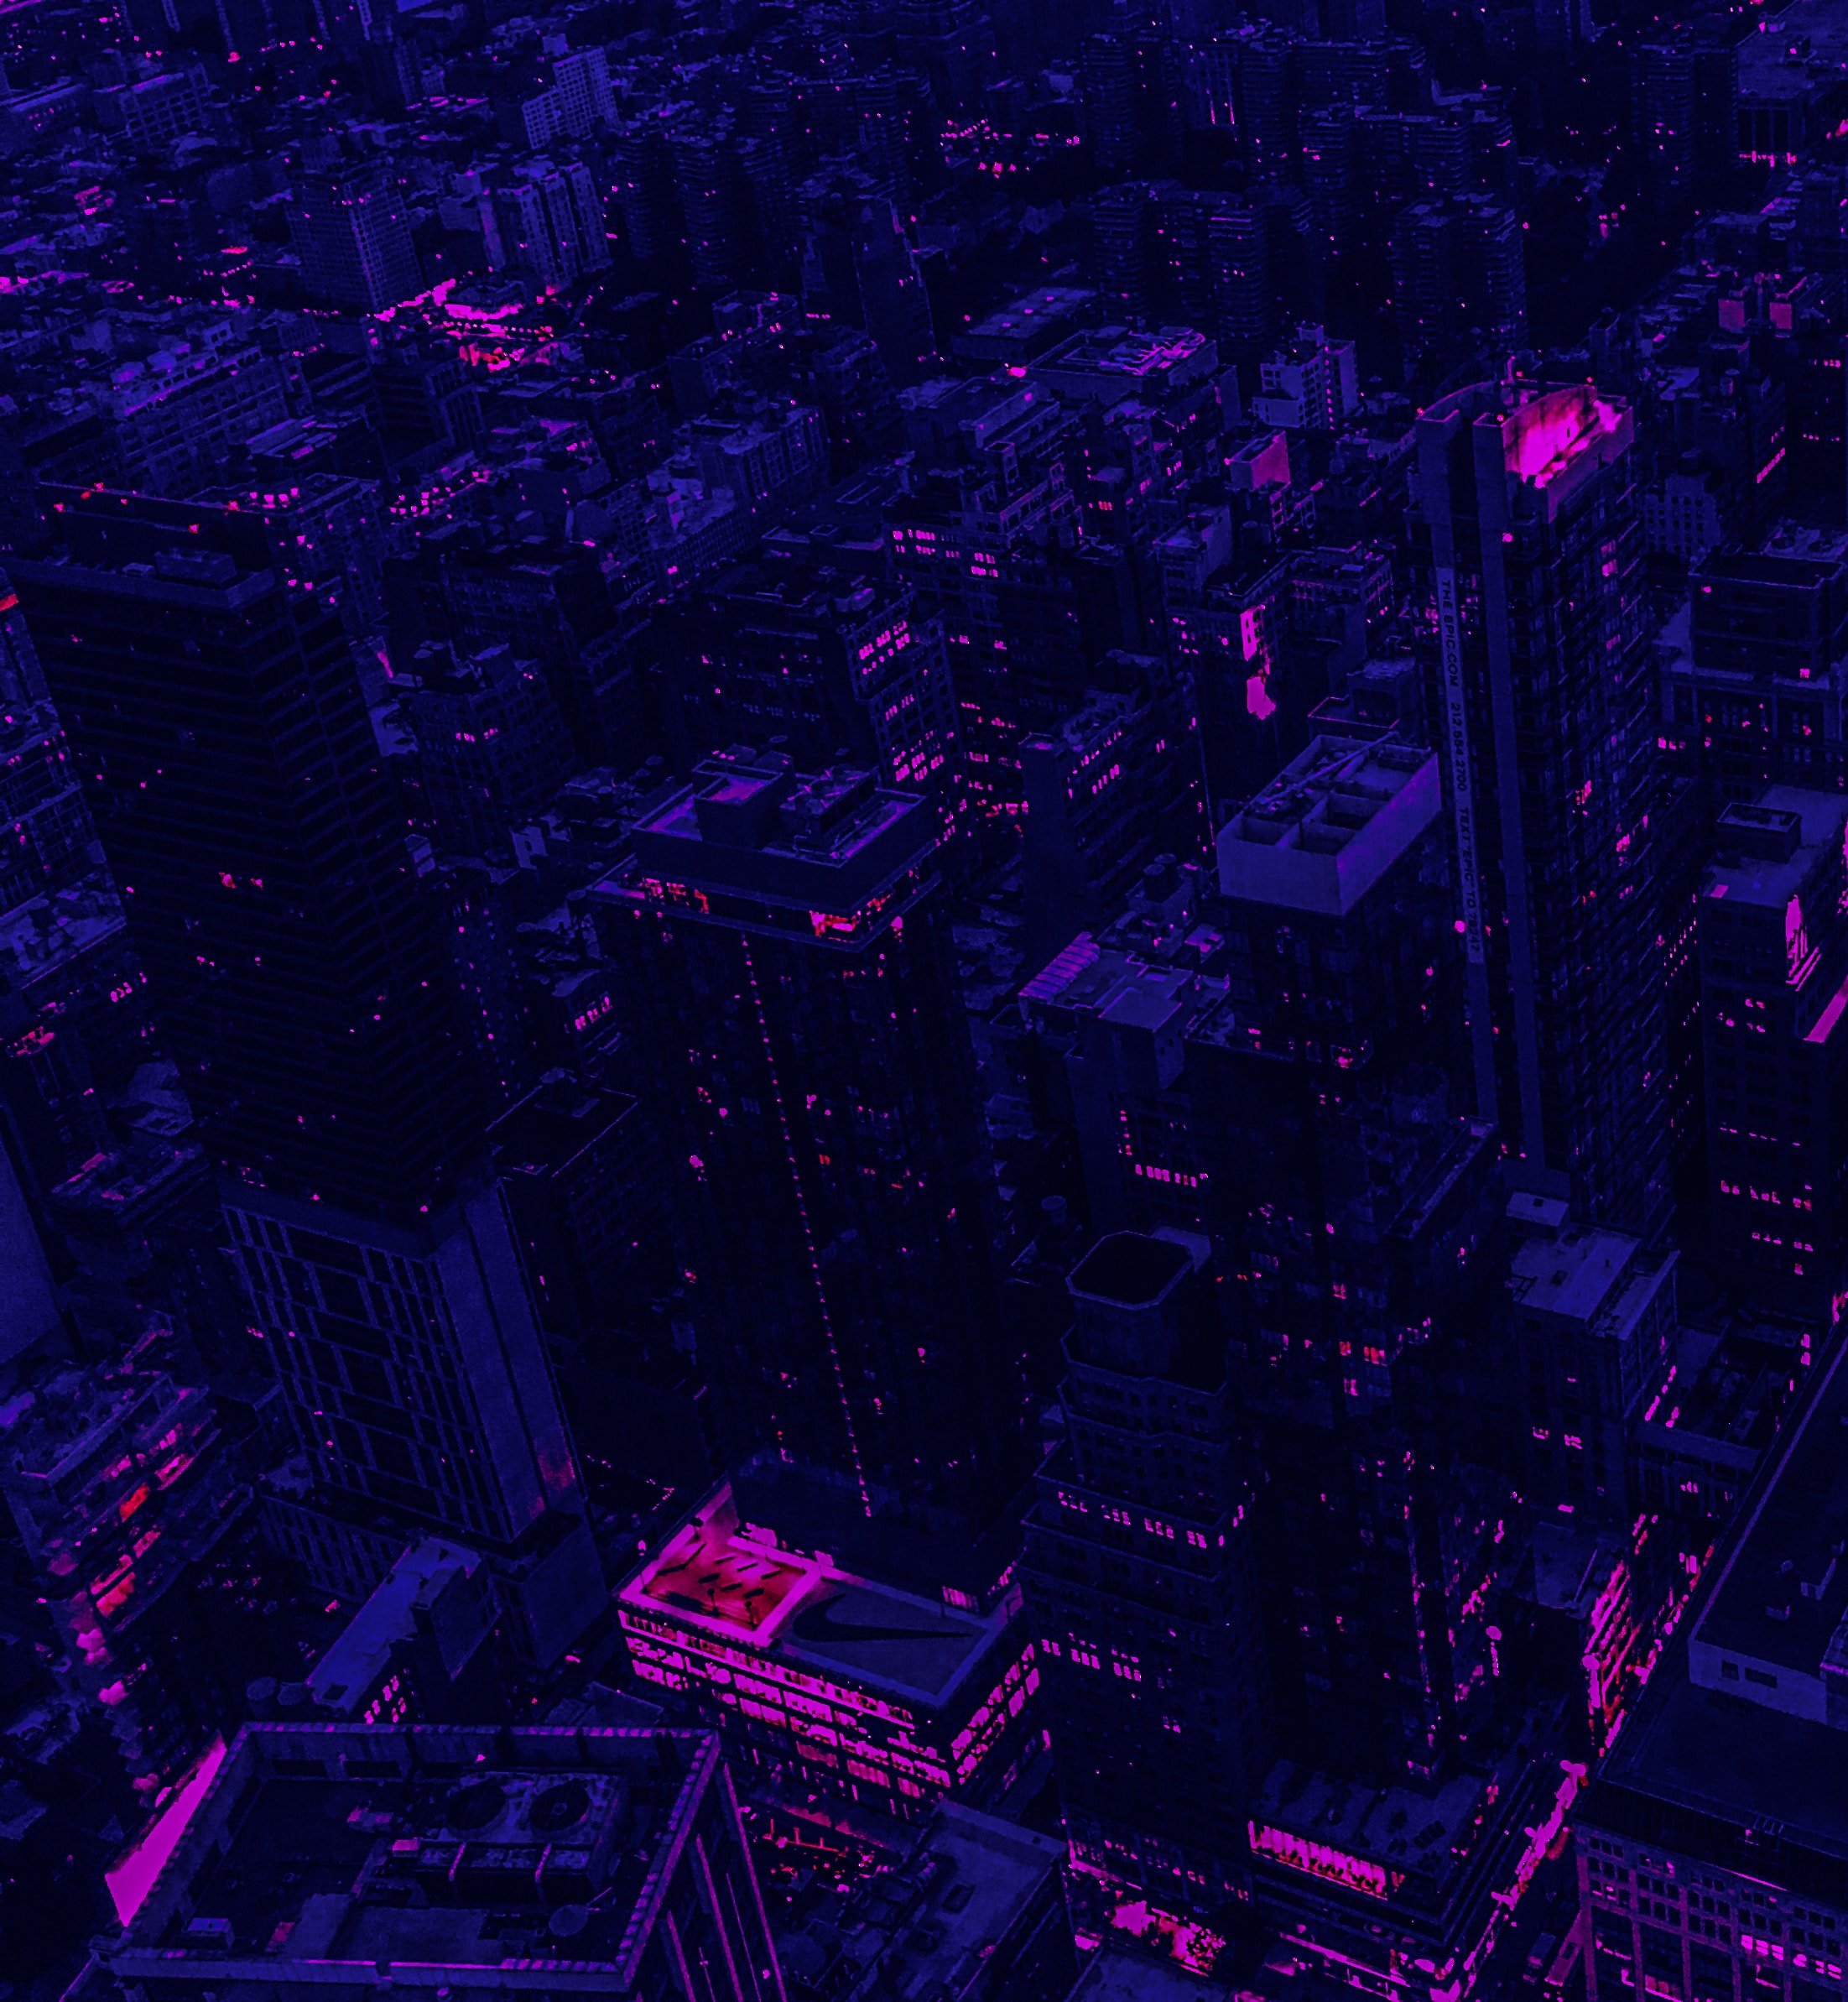 purple, violet, dark, view from above, city, building